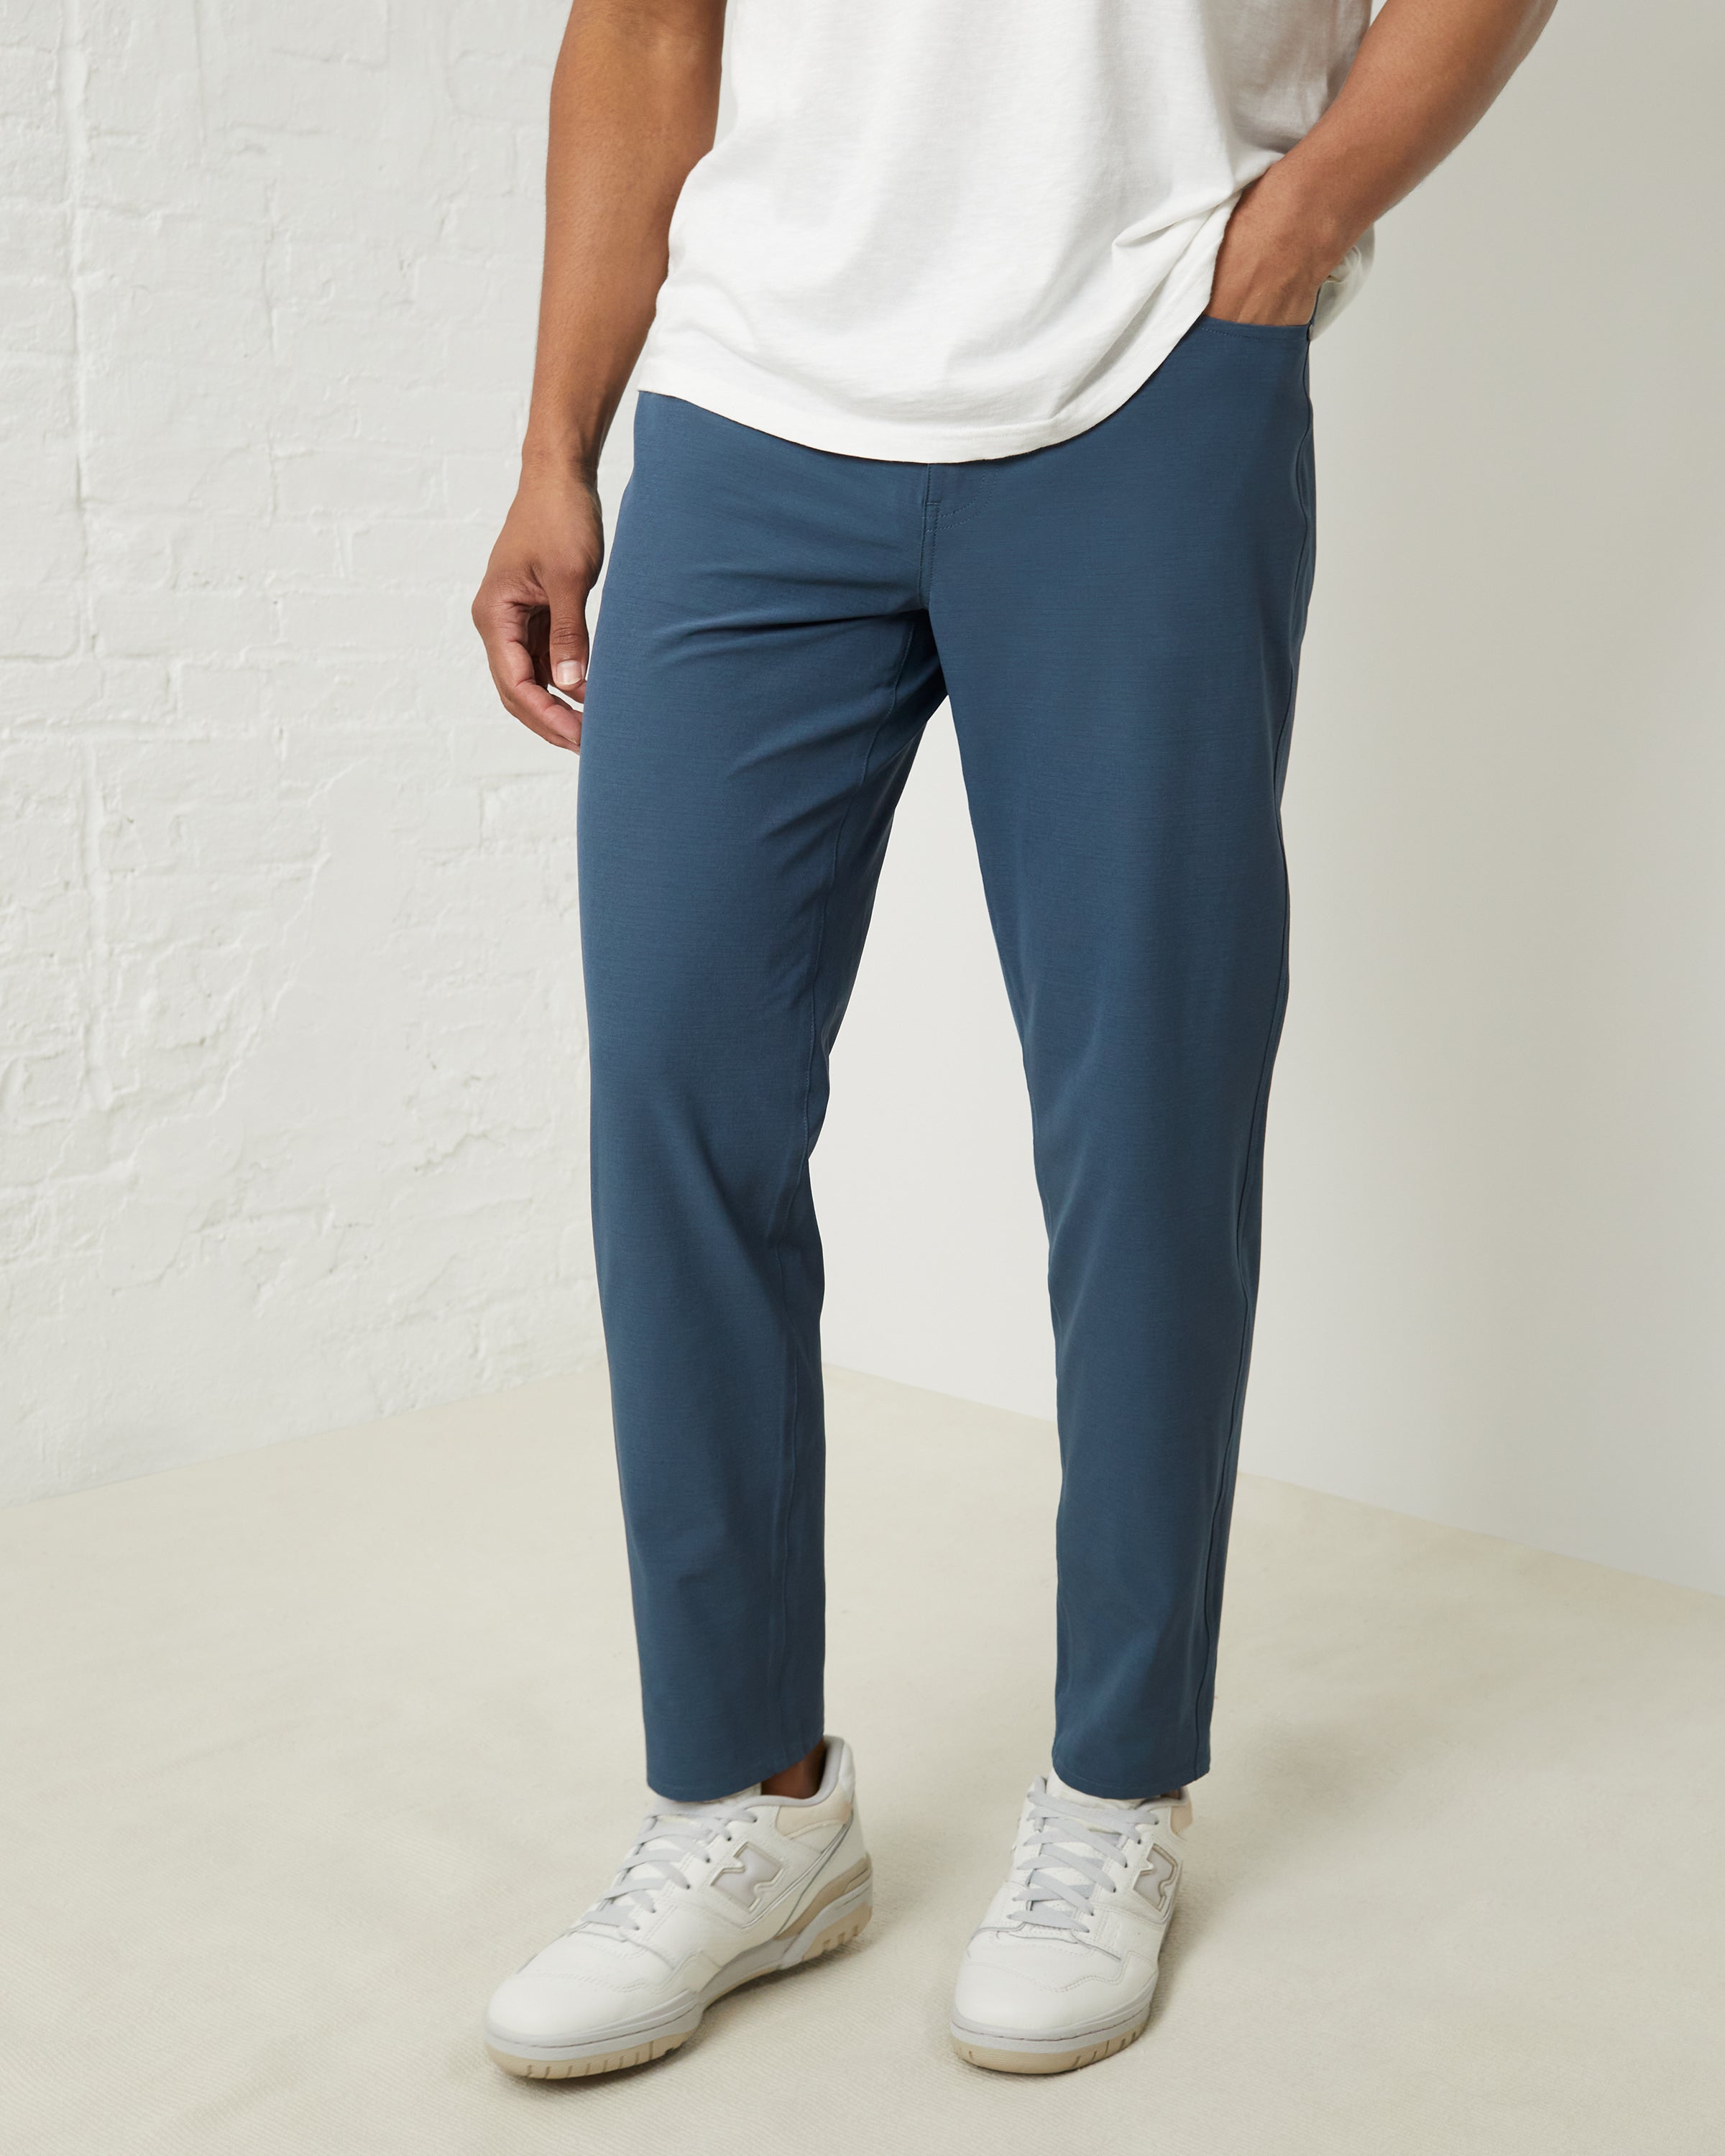 Men's Wicking Stretch Fabric Travel Pants at UpWest